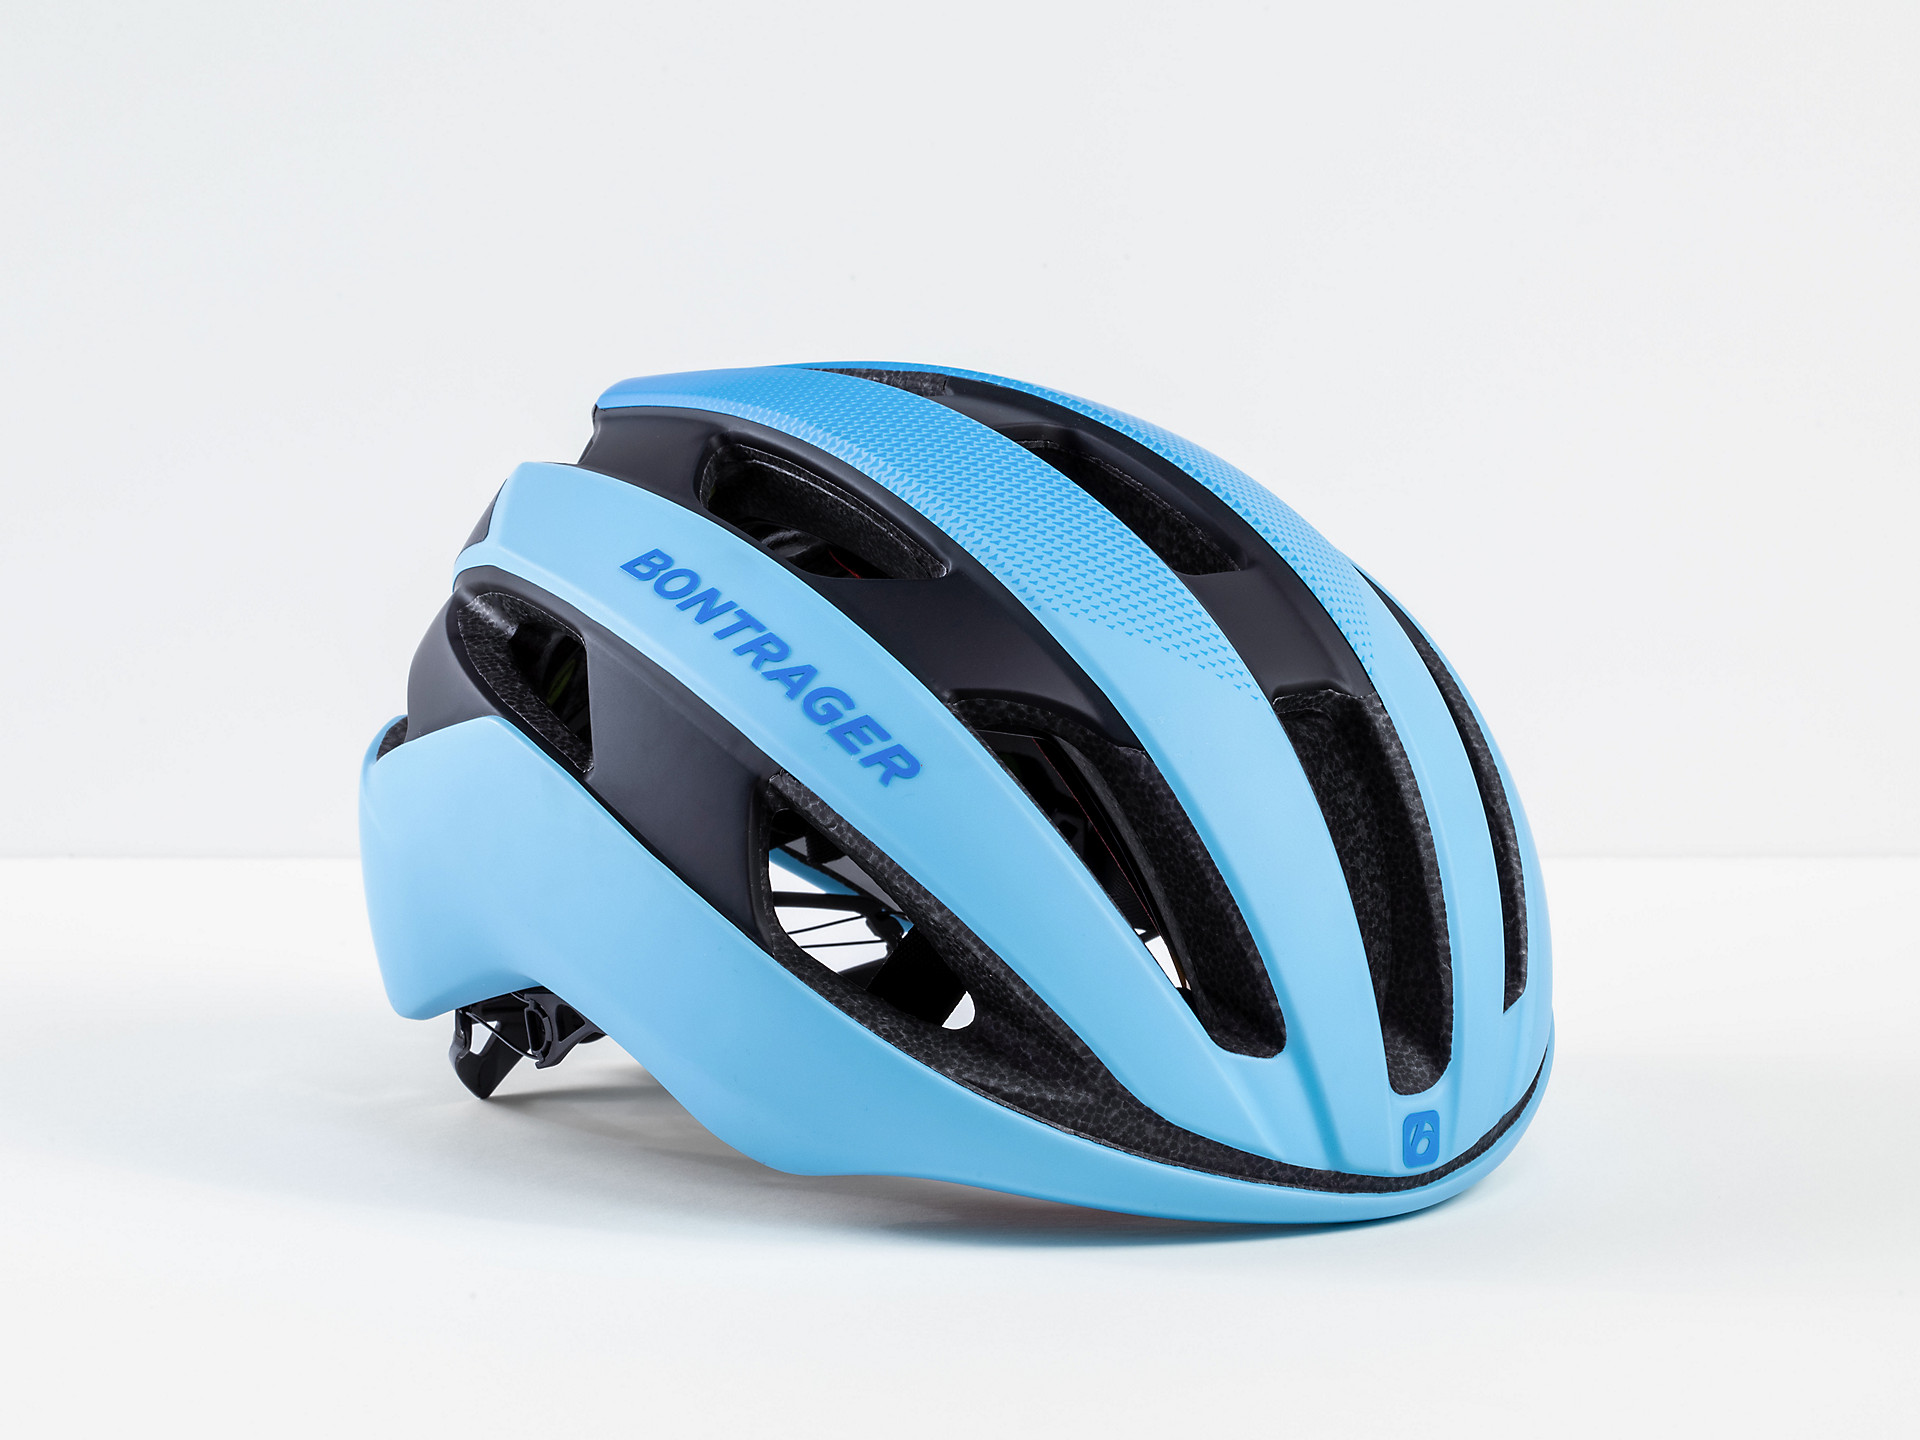 <a href="https://cycles-clement.be/product/casque-bont-circuit-mips-m-waterloo-blue/">CASQUE BONT CIRCUIT MIPS M WATERLOO BLUE</a>